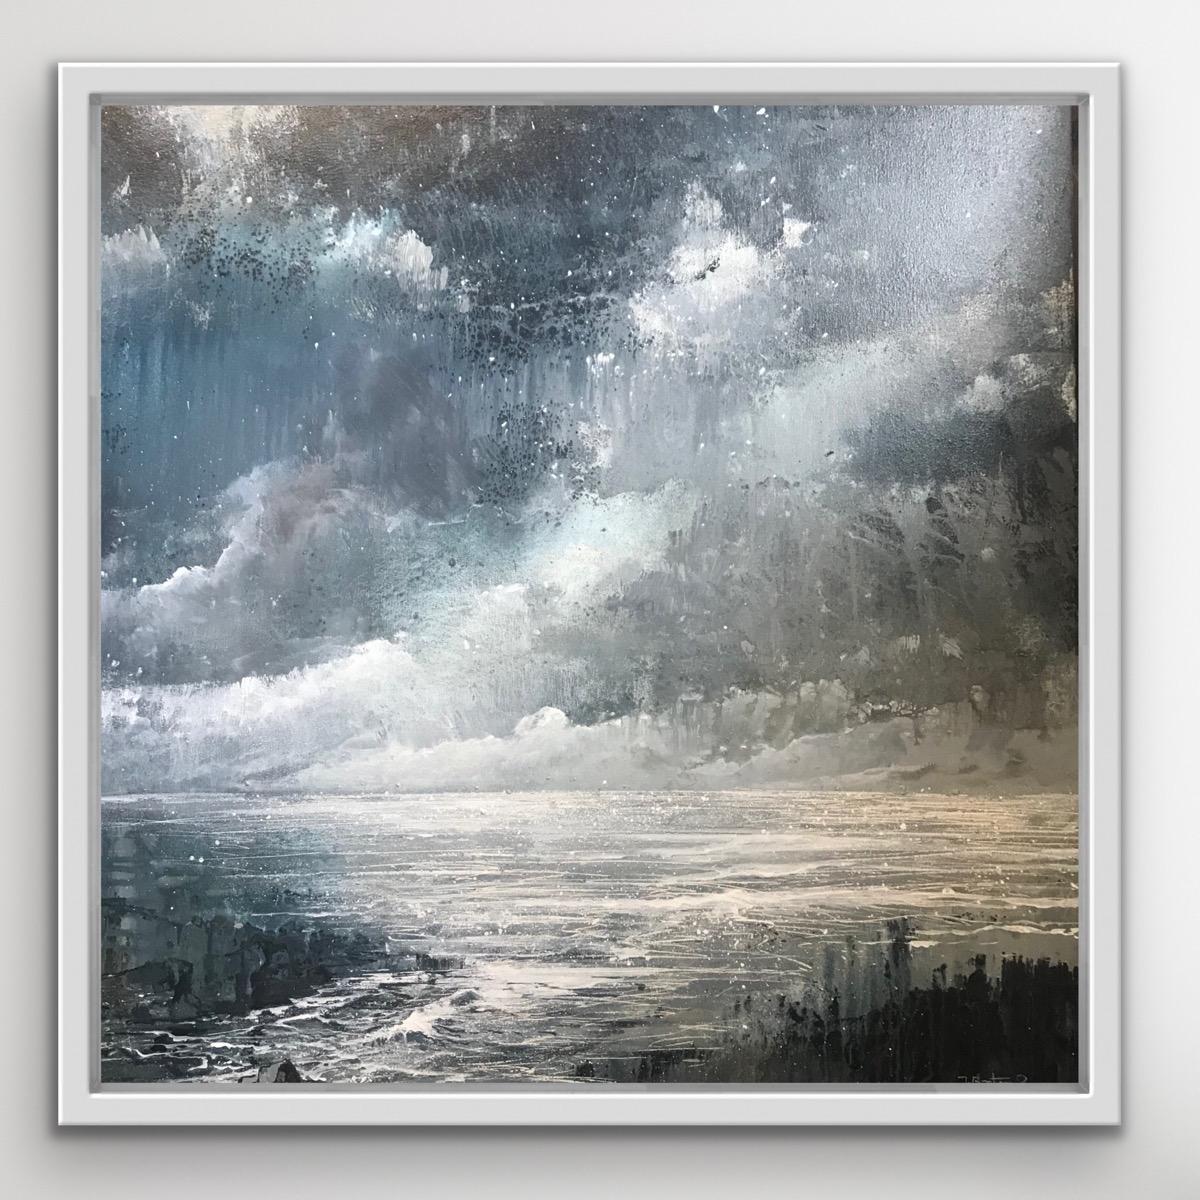 This powerful work by James Bonstow has an immediate impact when you see the work in the flesh. 

Additional information:
Darkness at the Coast by James Bonstow
Original Painting
Oil on Canvas
Image size: H 70 x W 70 cm
Complete size of unframed